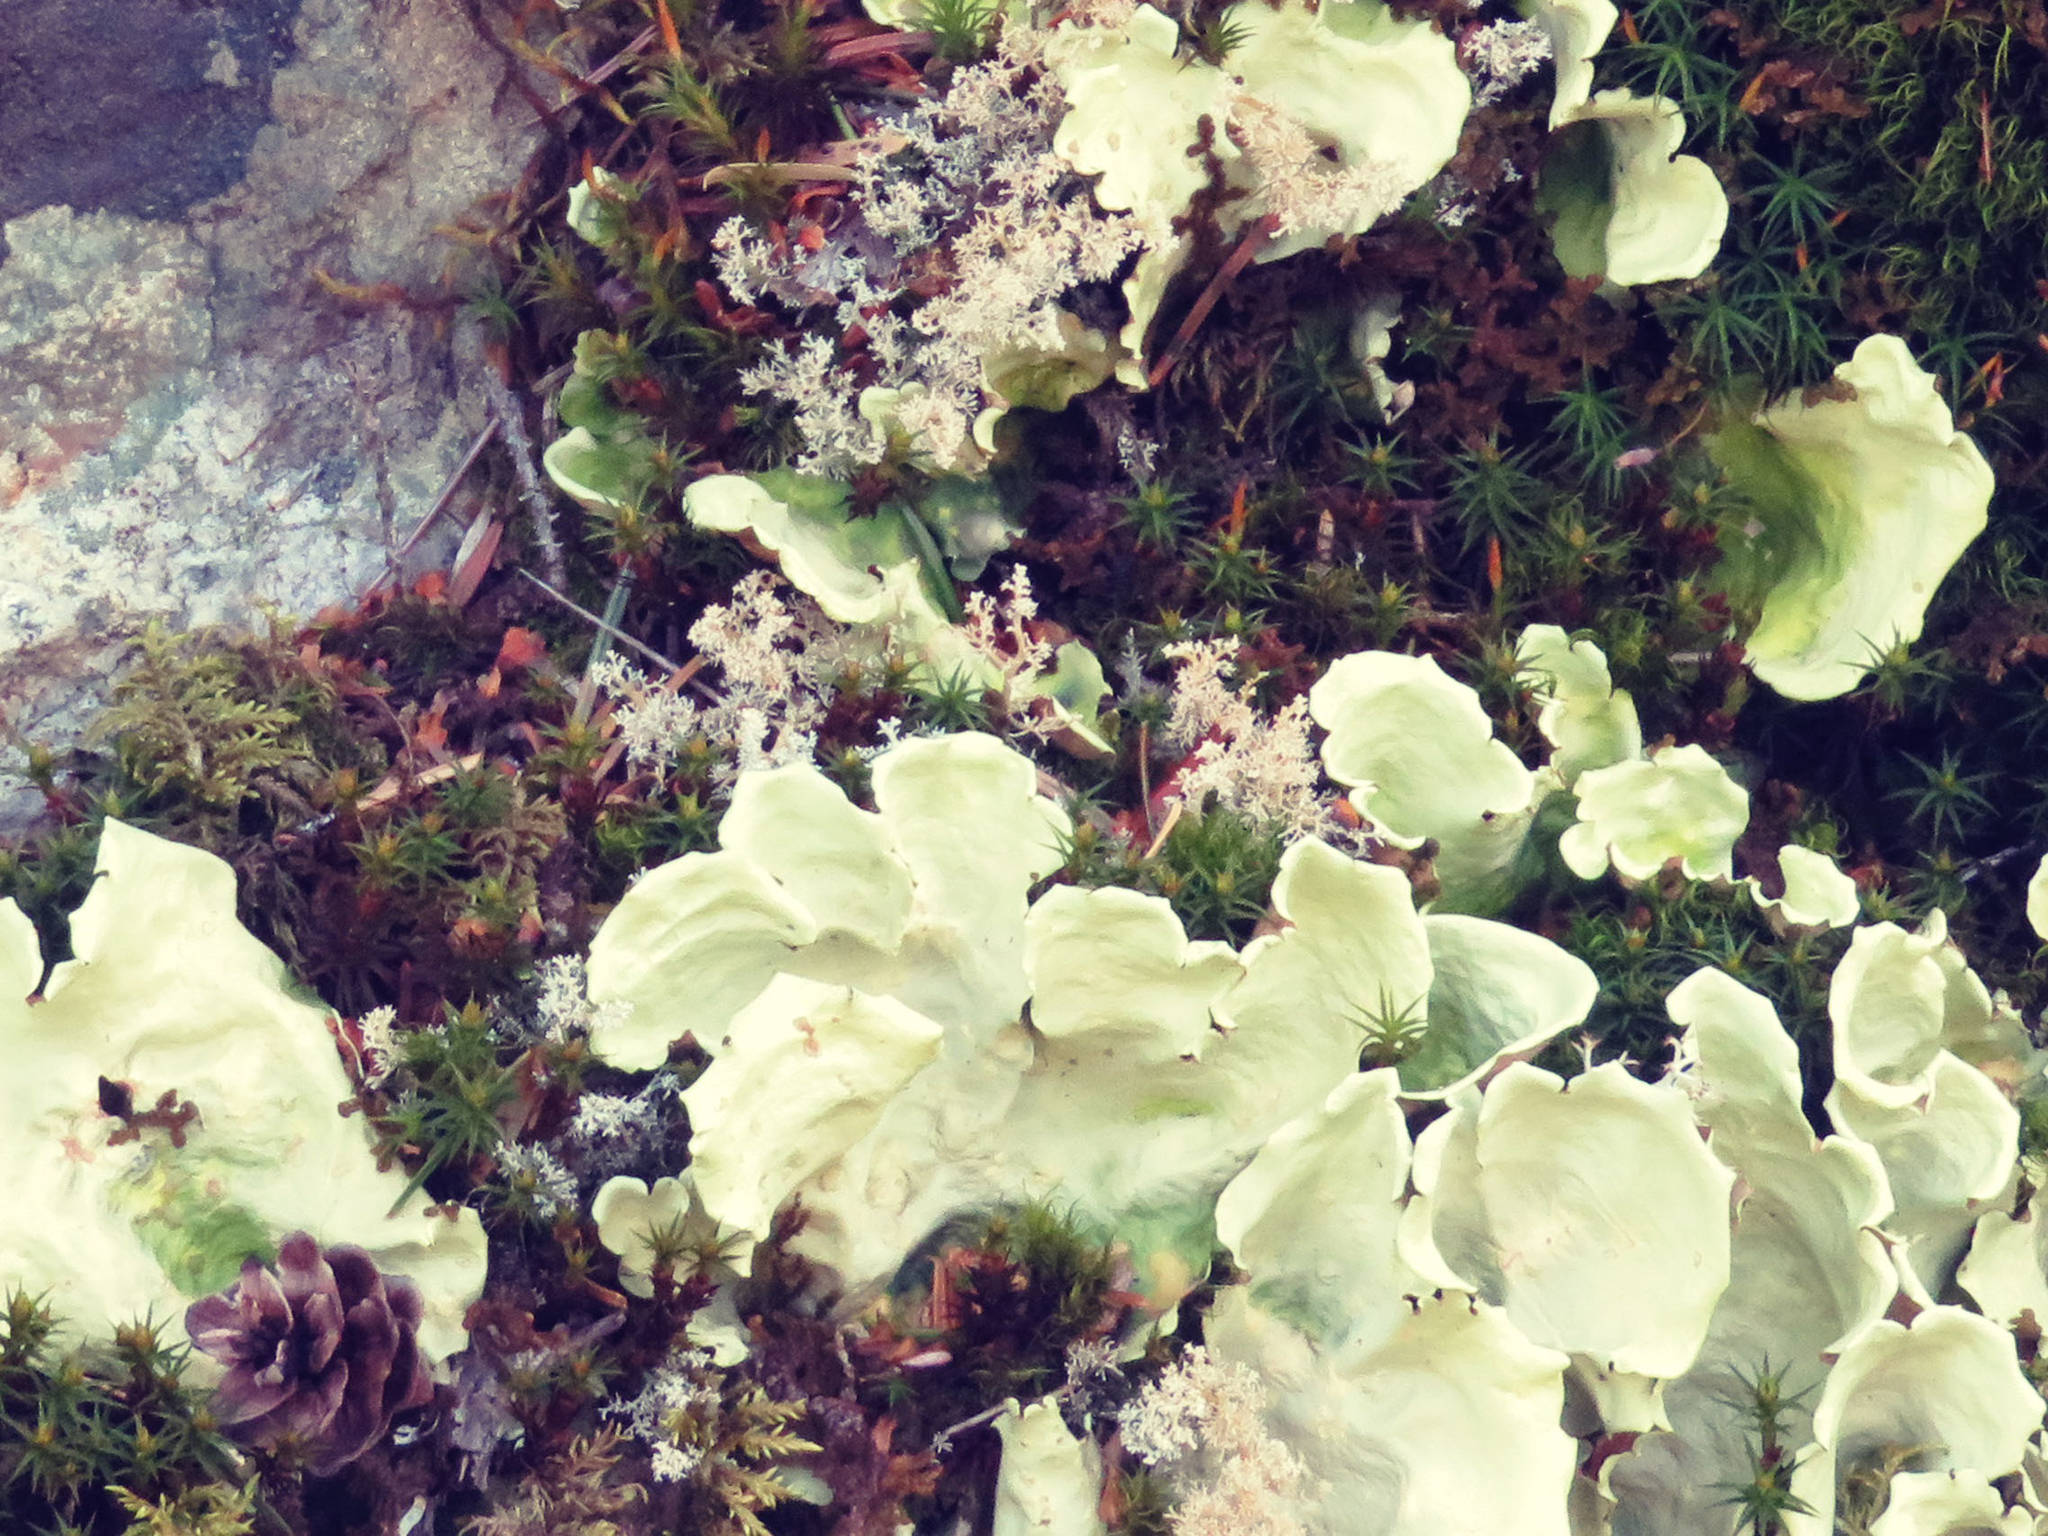 Lichens blooming on a rocky surface. Photo by Ray Tsang.